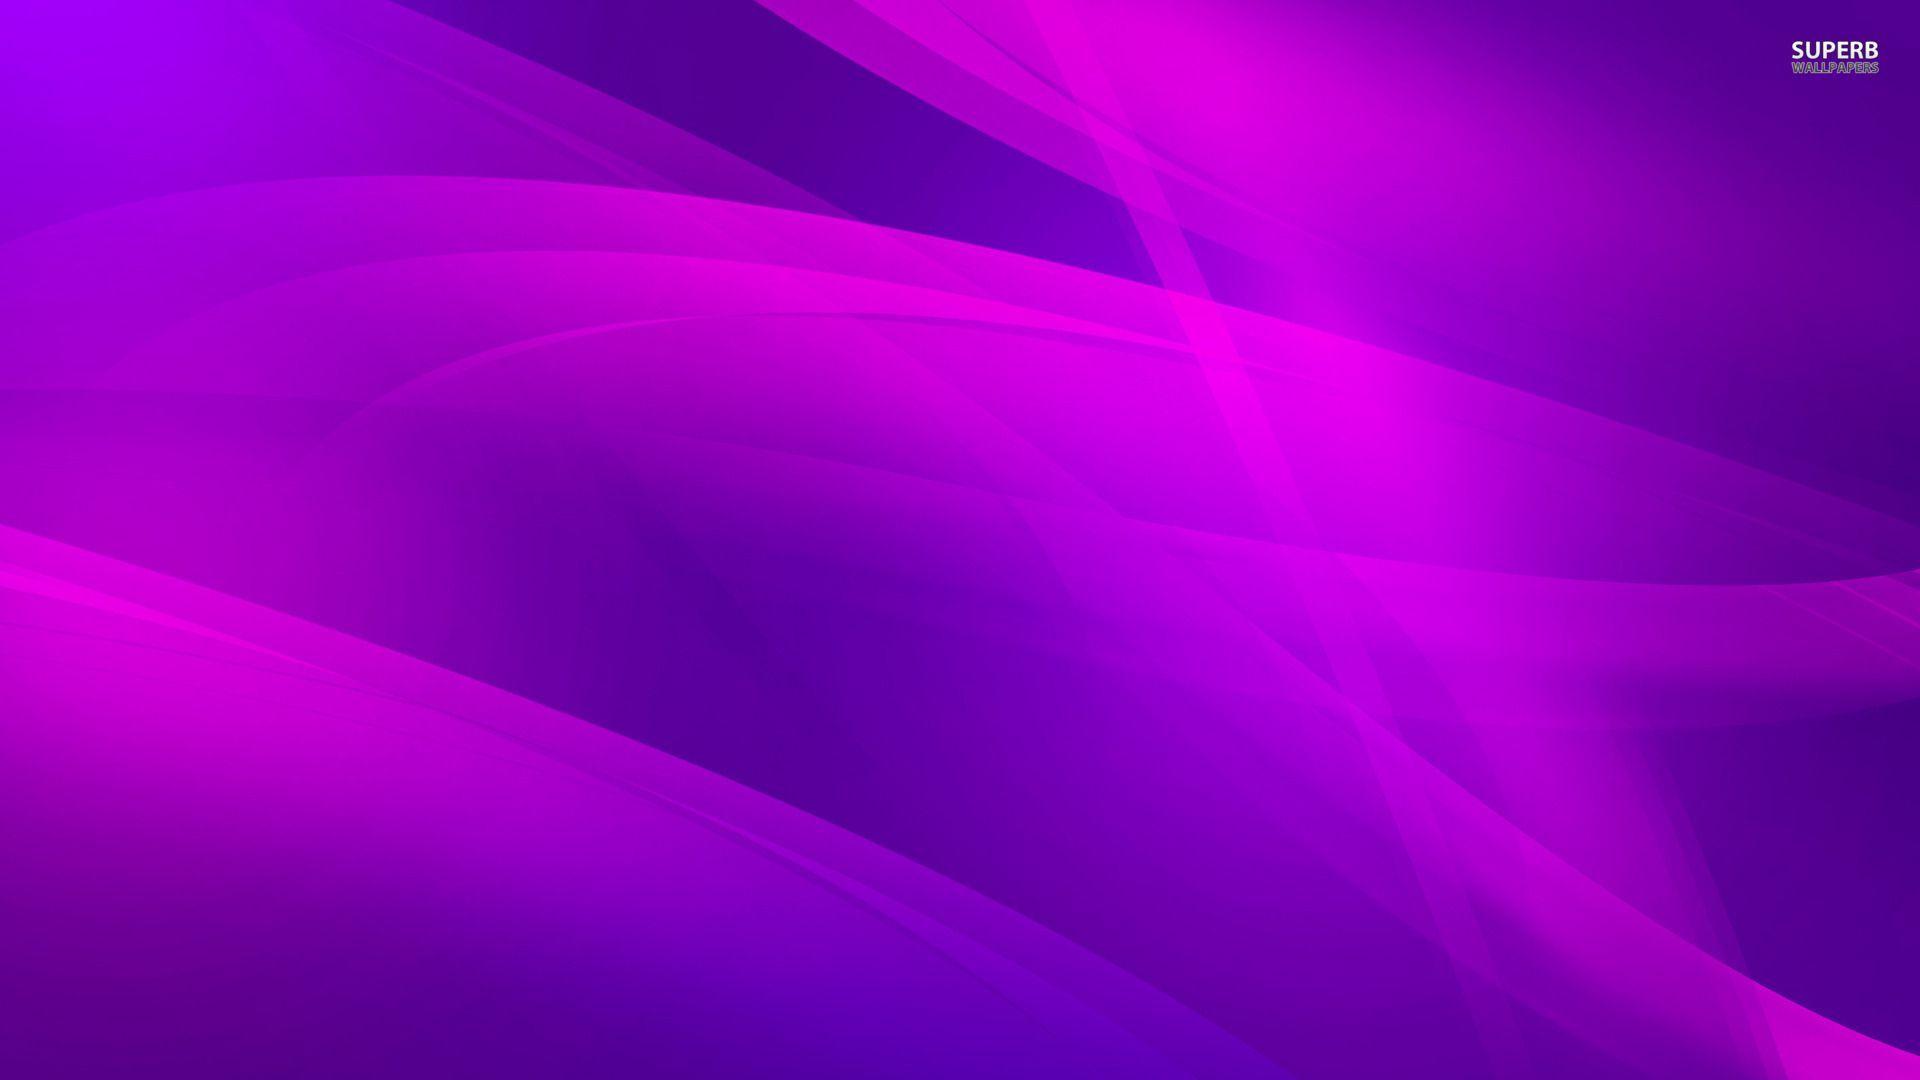 Pink curves on purple wallpaper